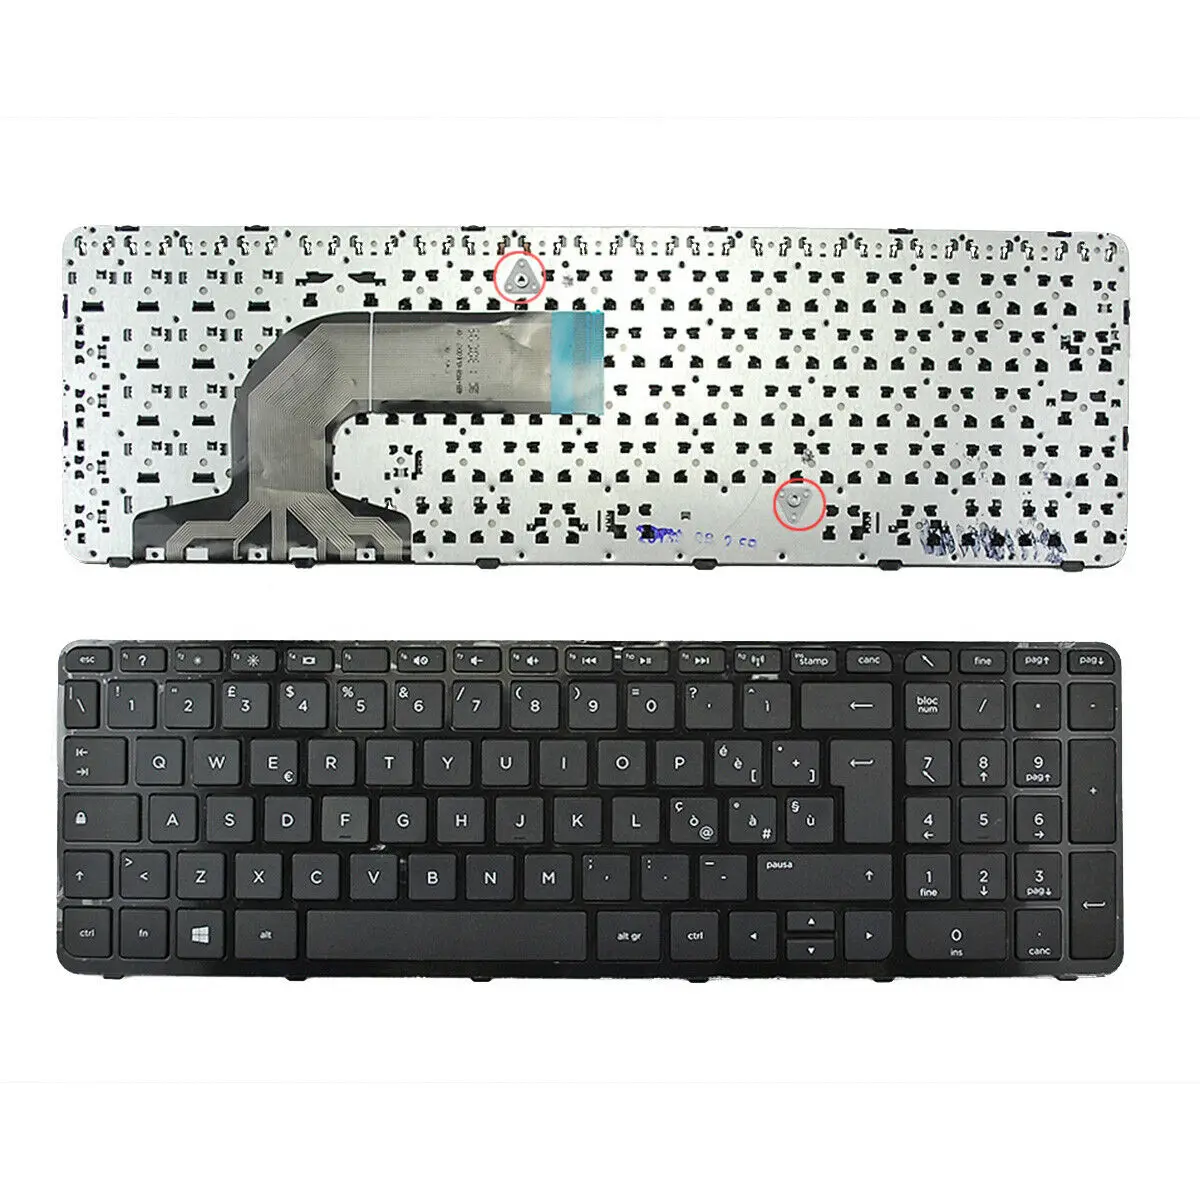 

Italy laptop Keyboard For HP Pavilion 15-N 15-E 15E 15N 15T 15-F 15-G 15-R 15-A 15-S 15-H 250 G2 G3 255 G2 G3 256 G2 G3